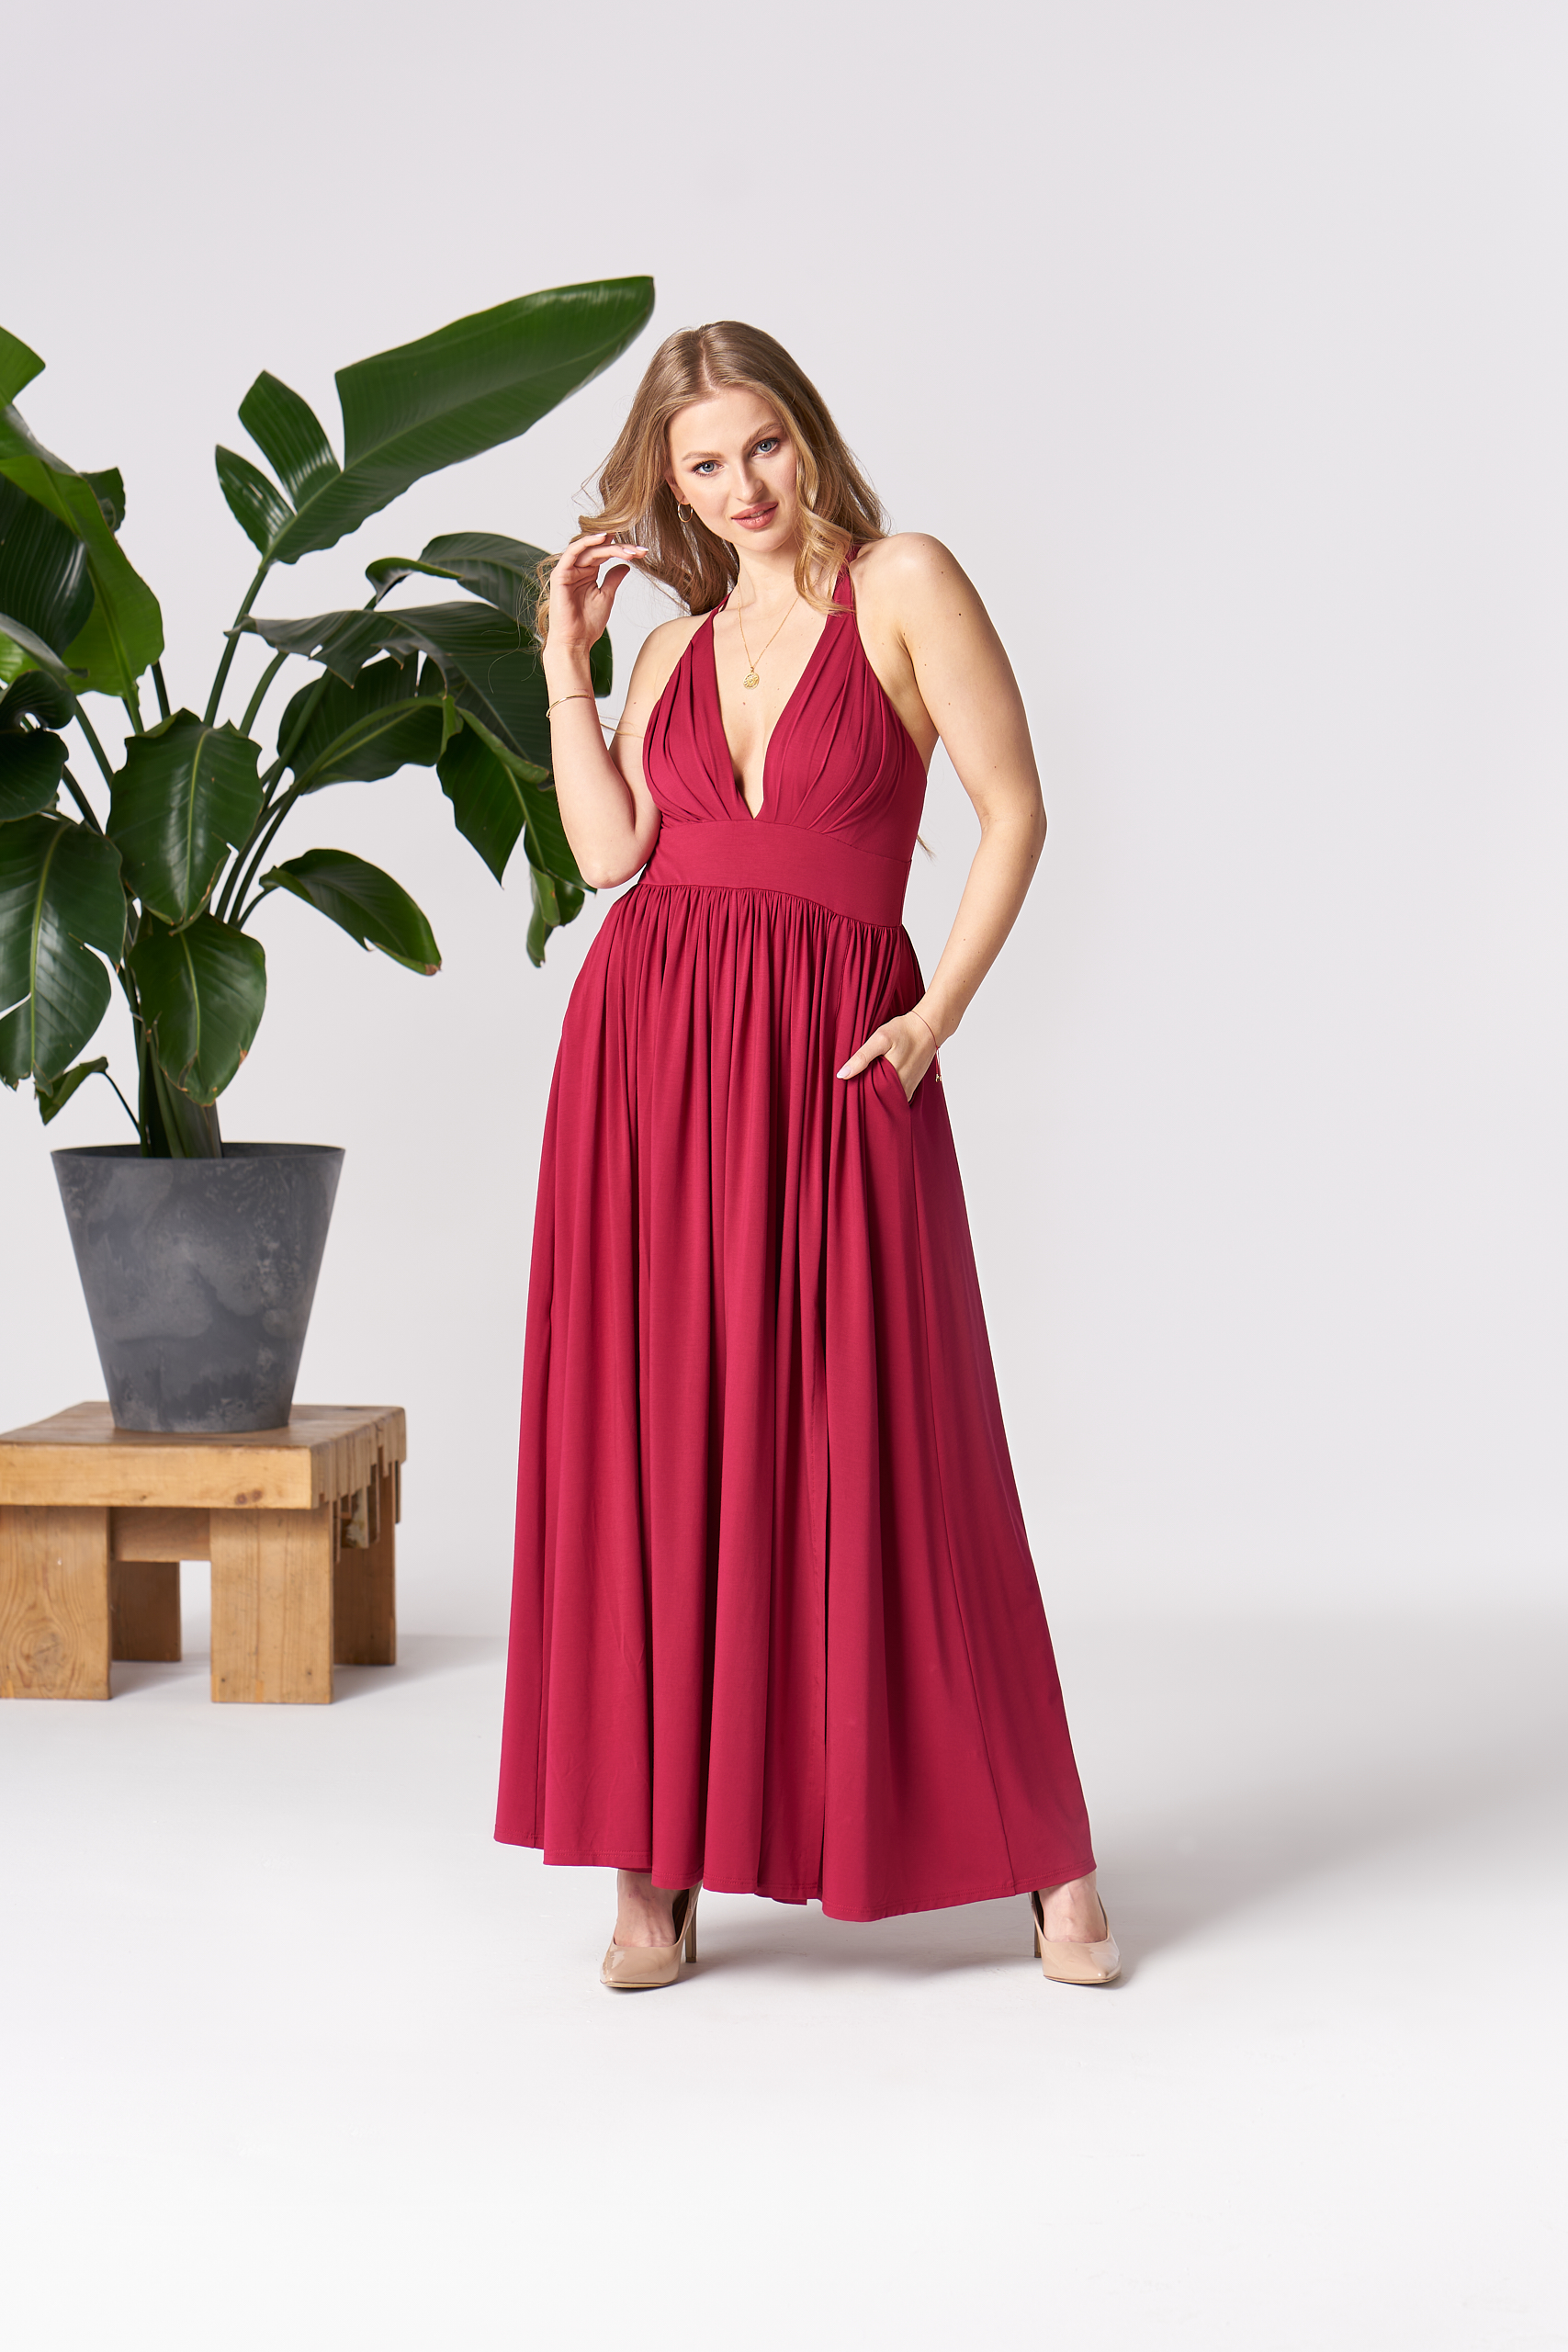 By Your Side Woman's Dress Zinnia Scarlet Sage